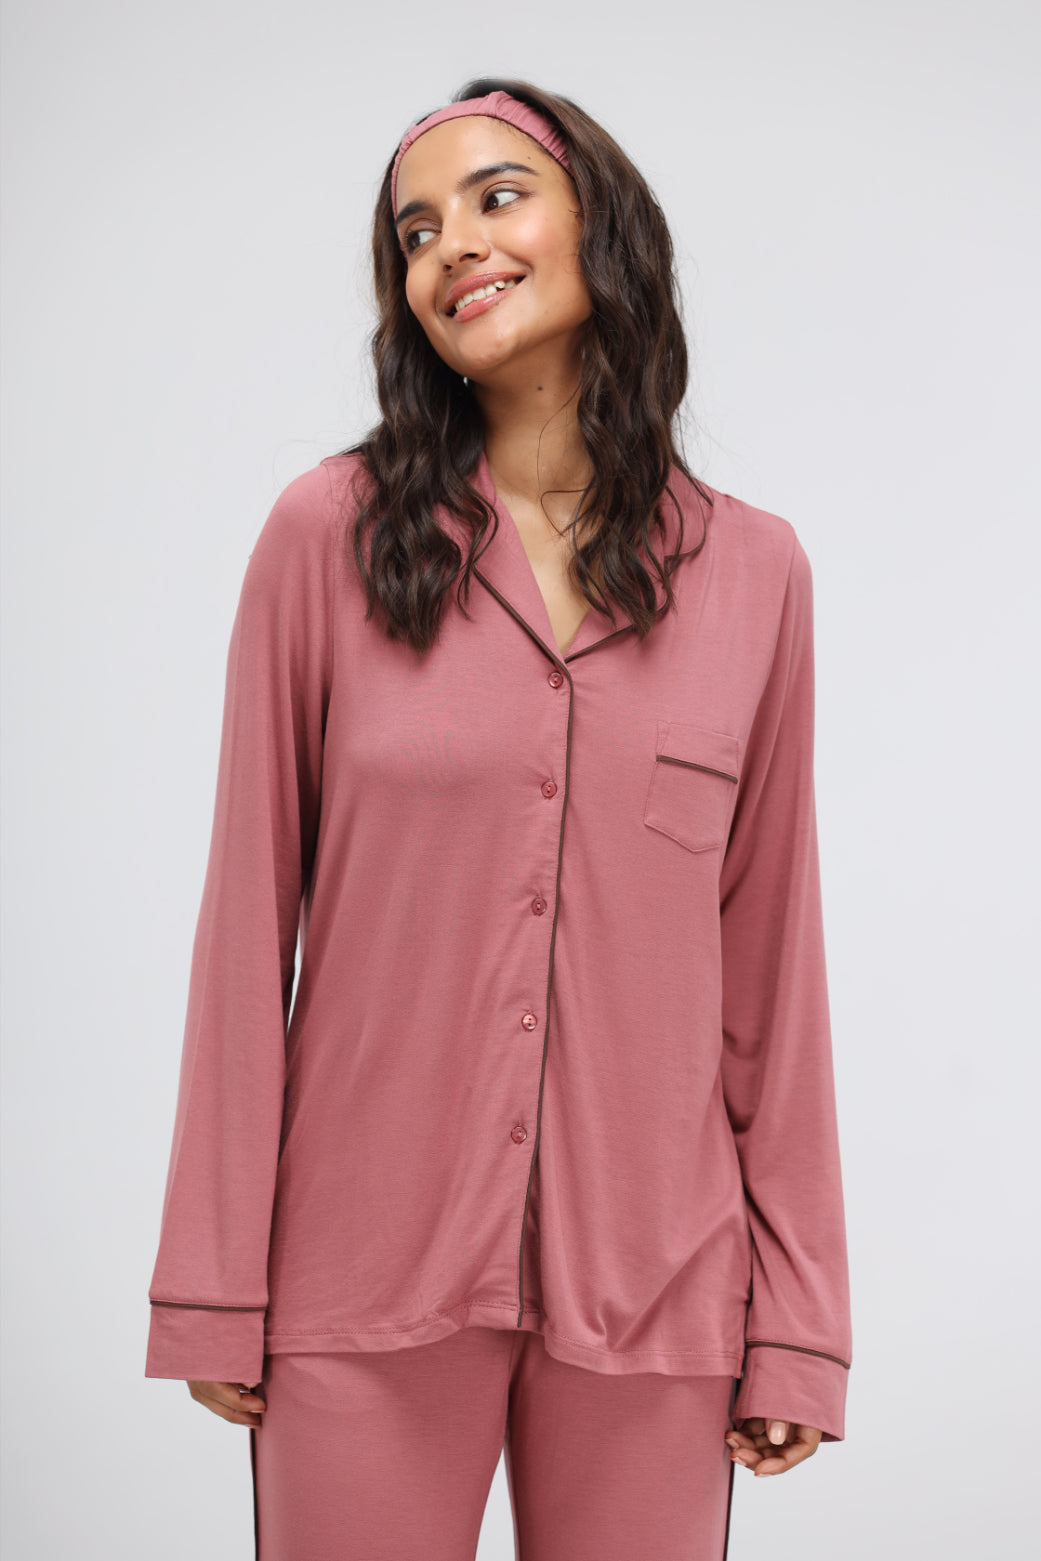 Deco Rose Modal Button Down Piping Full Sleeve Lounge Top